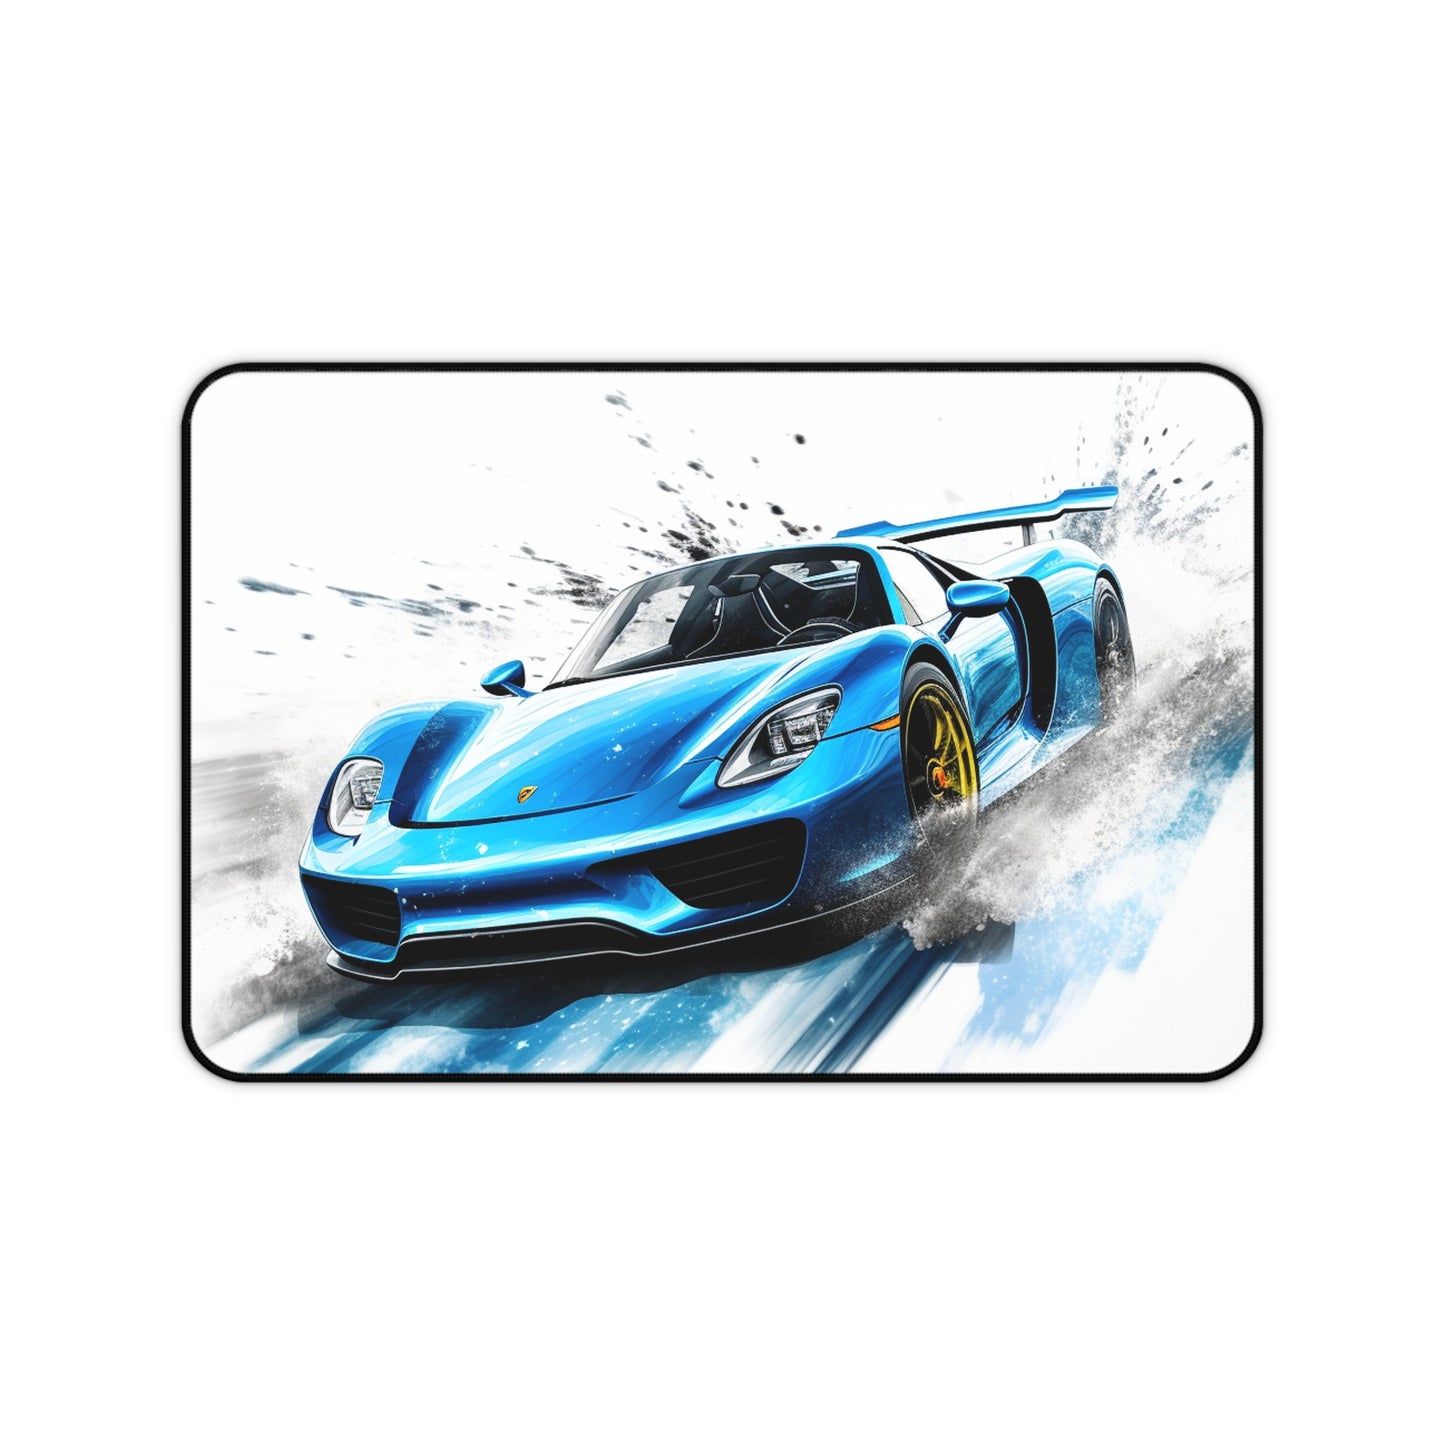 Desk Mat 918 Spyder with white background driving fast on water 3